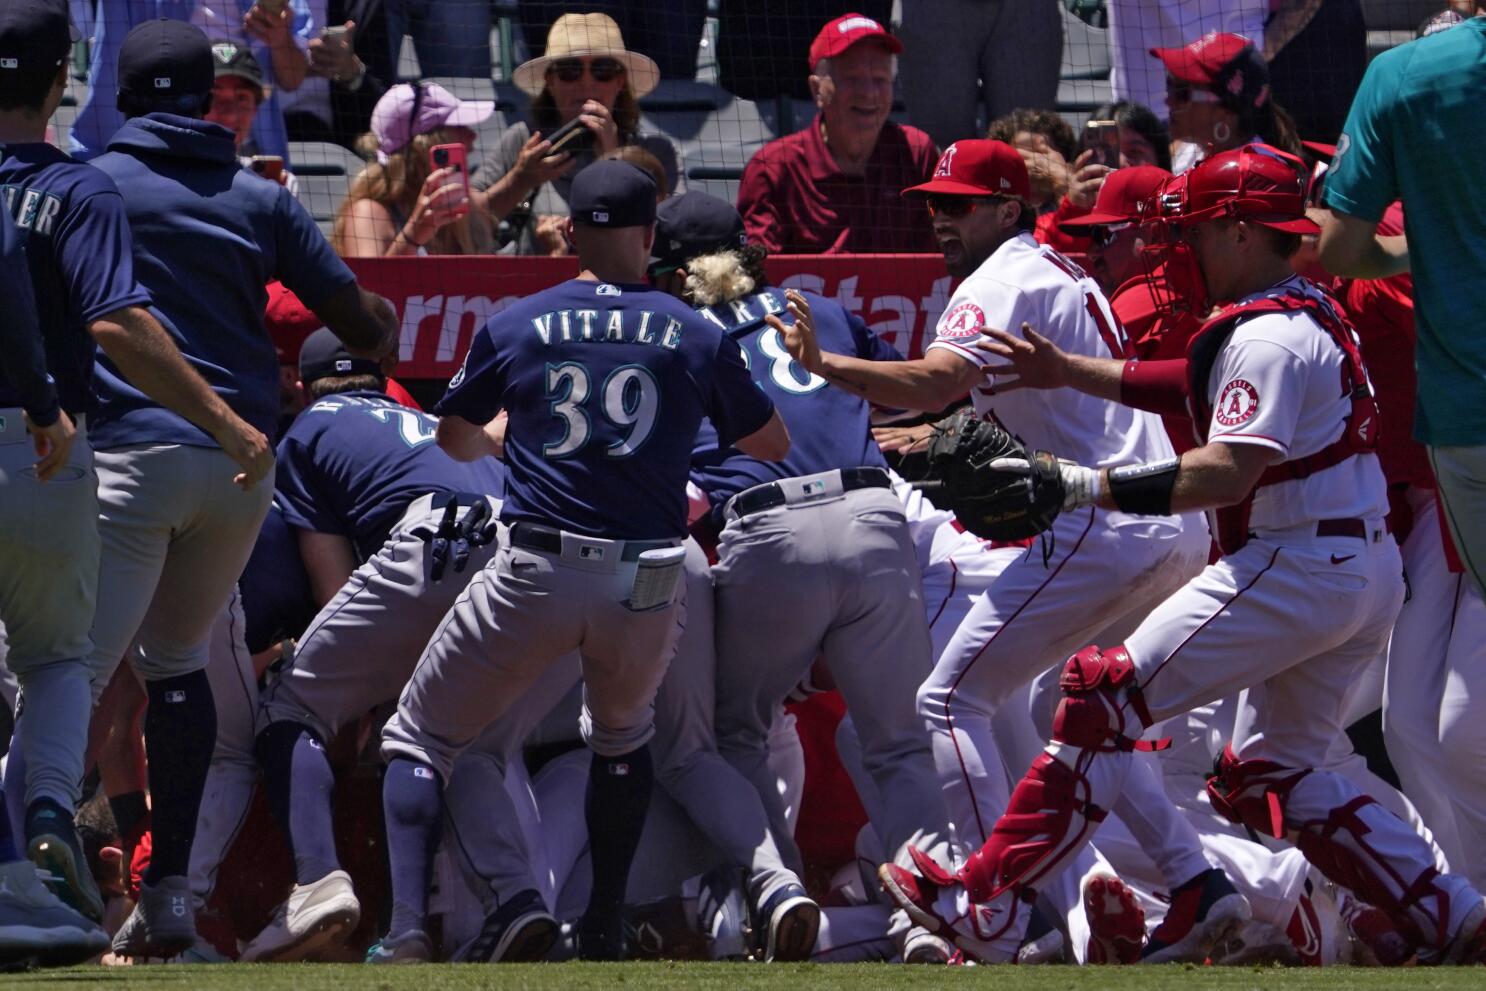 Benches clear twice in Red Sox-Yankees; 3 players, 1 coach ejected